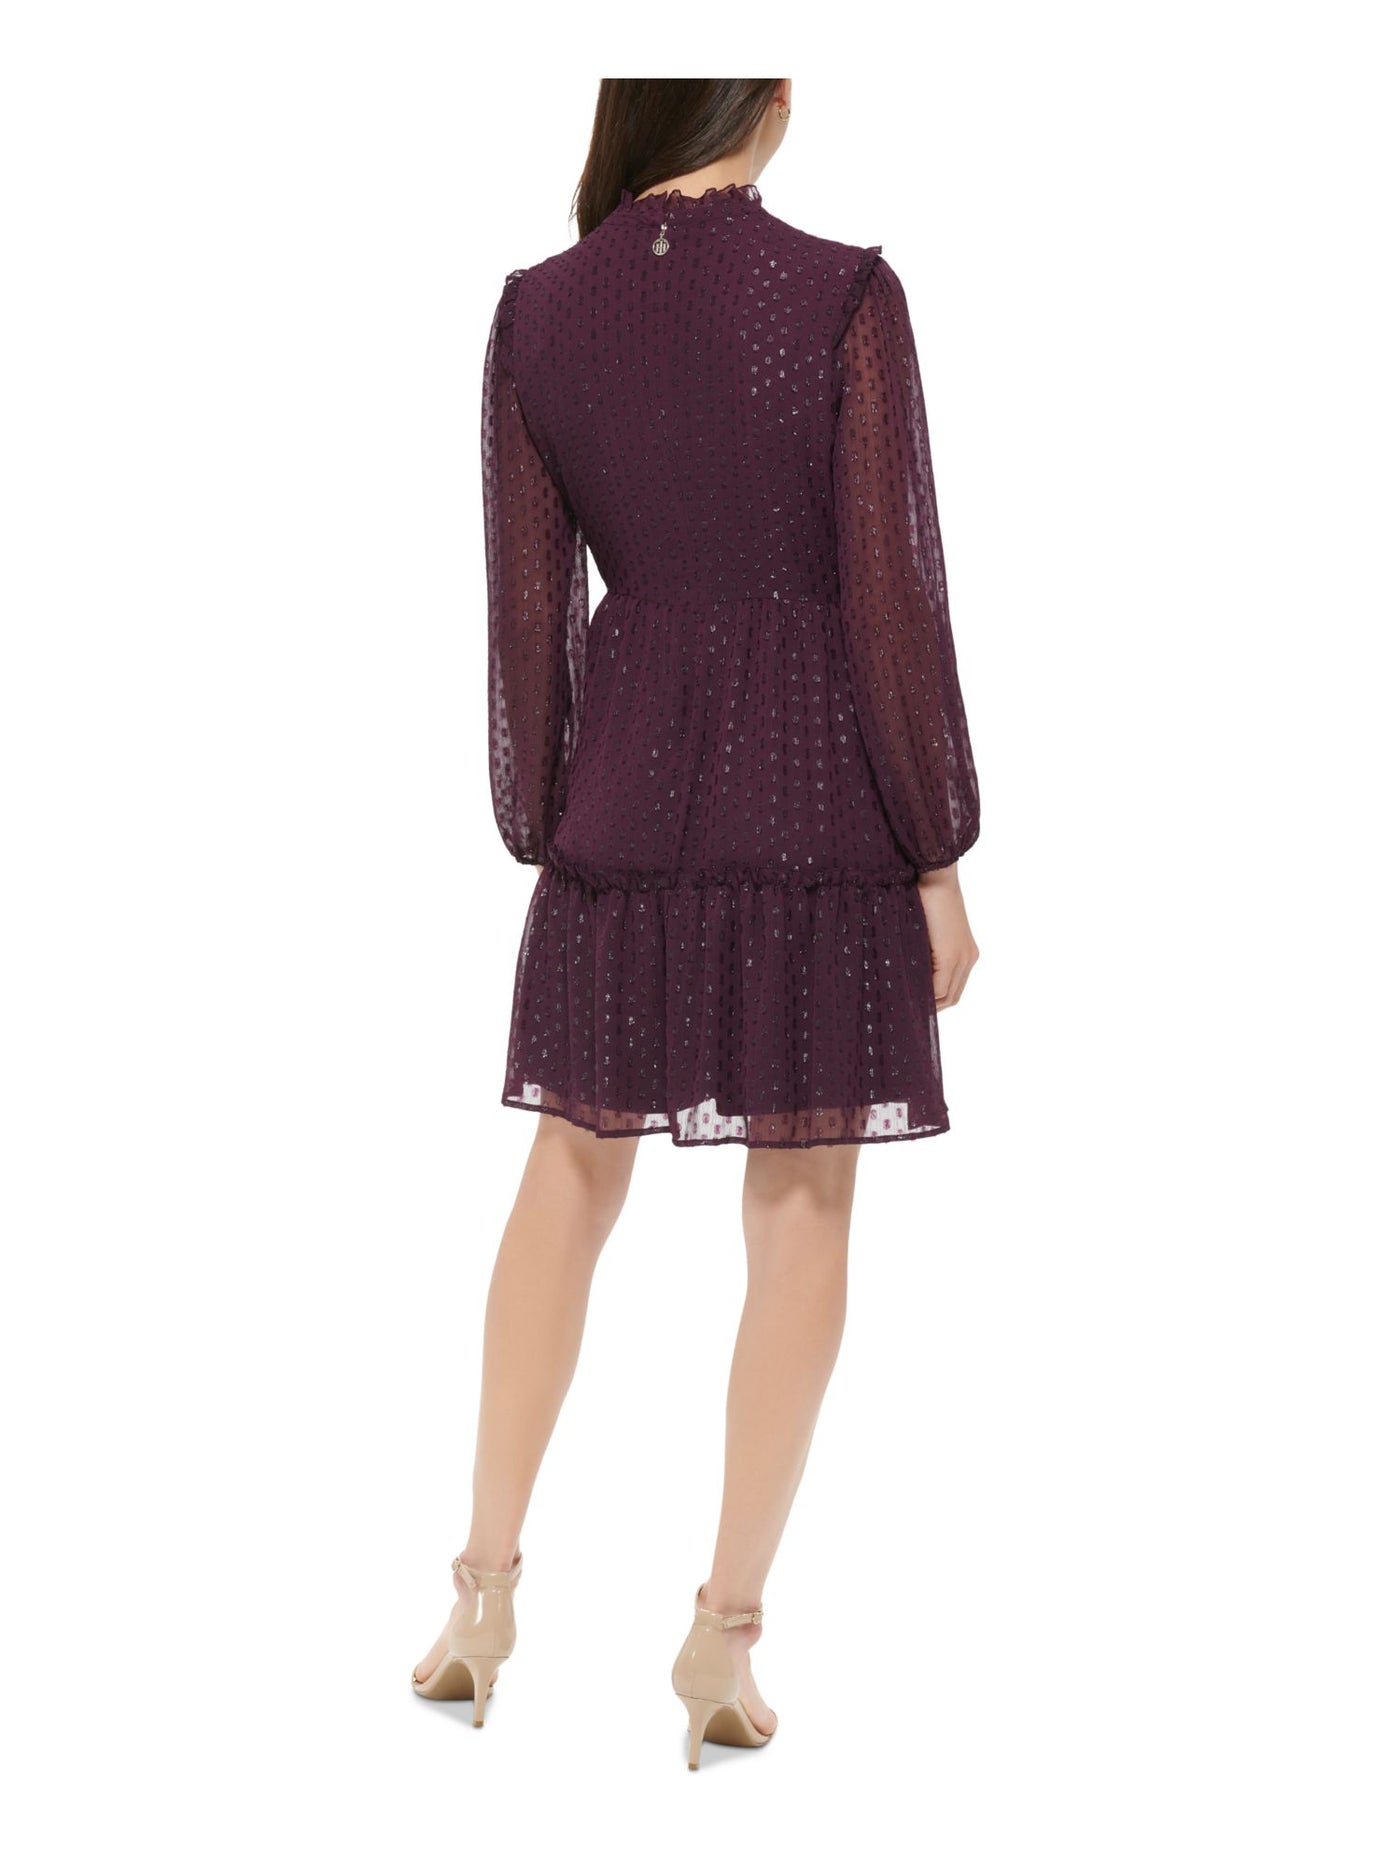 TOMMY HILFIGER Womens Purple Ruffled Long Sleeve Mock Neck Above The Knee Cocktail Shift Dress 12